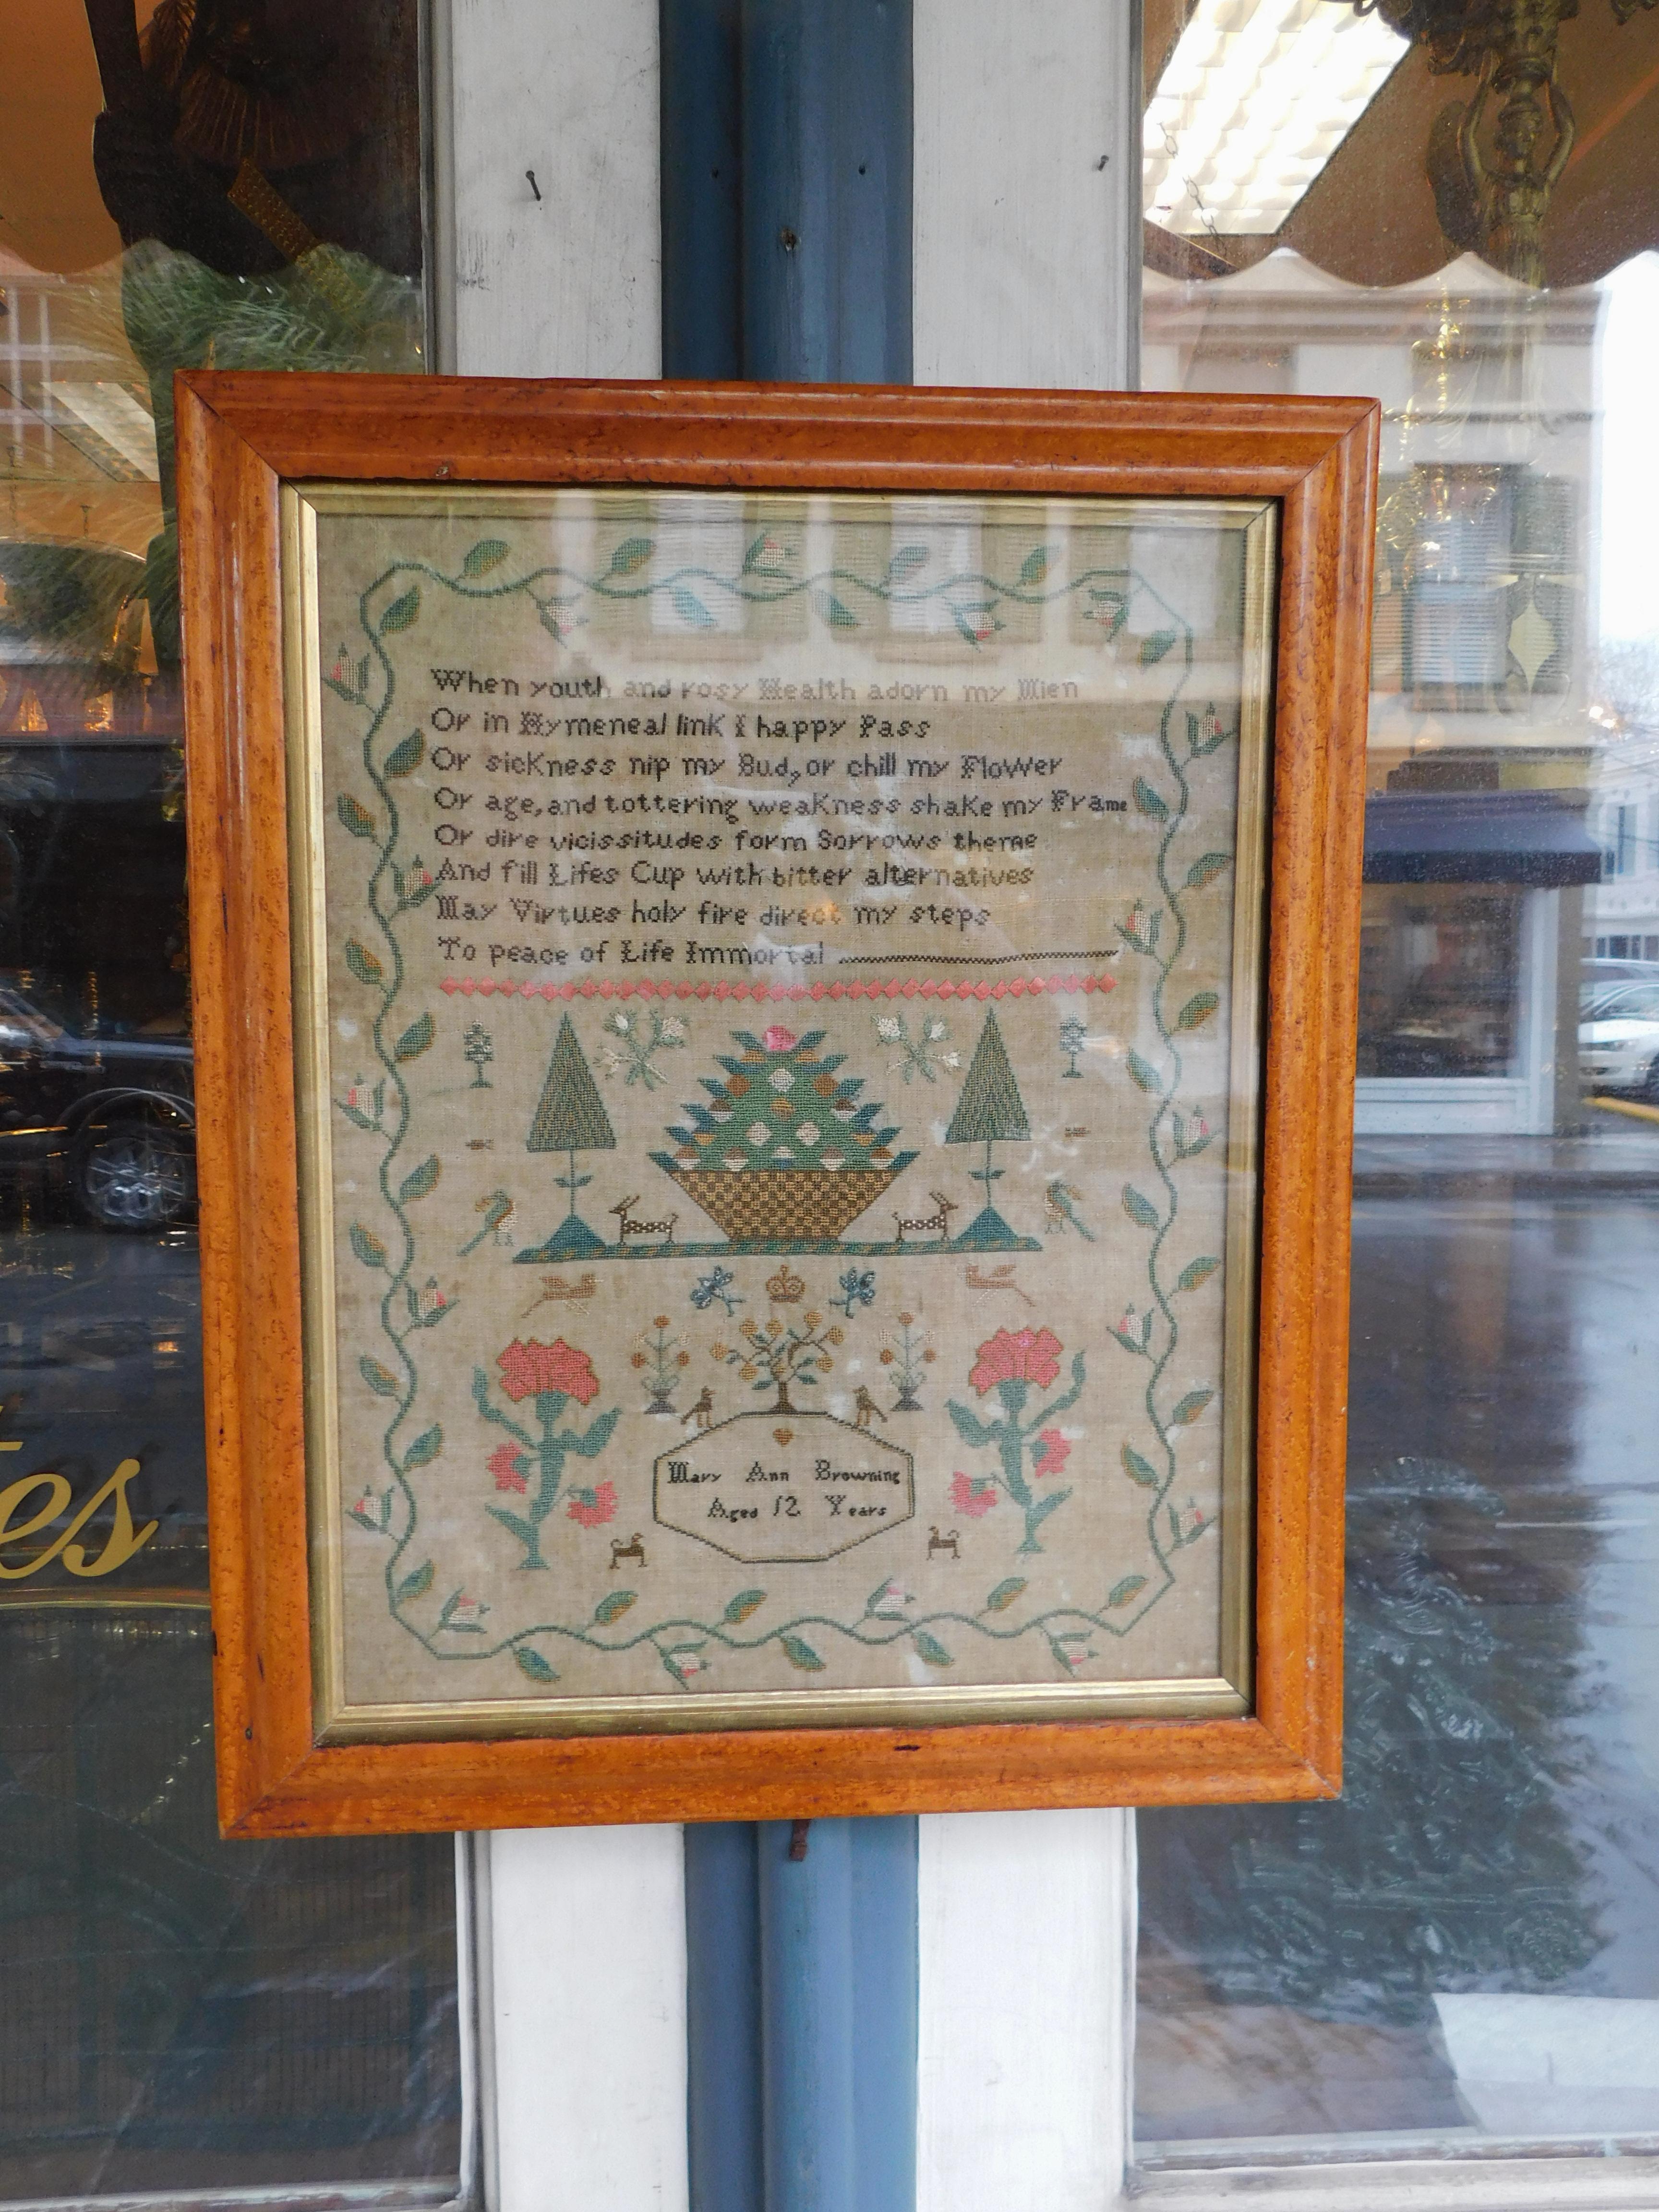 American sampler under glass with the original gilt Birdseye maple molded edge frame, Early 19th Century. Signed by maker Mary Ann Browning, Age 12.